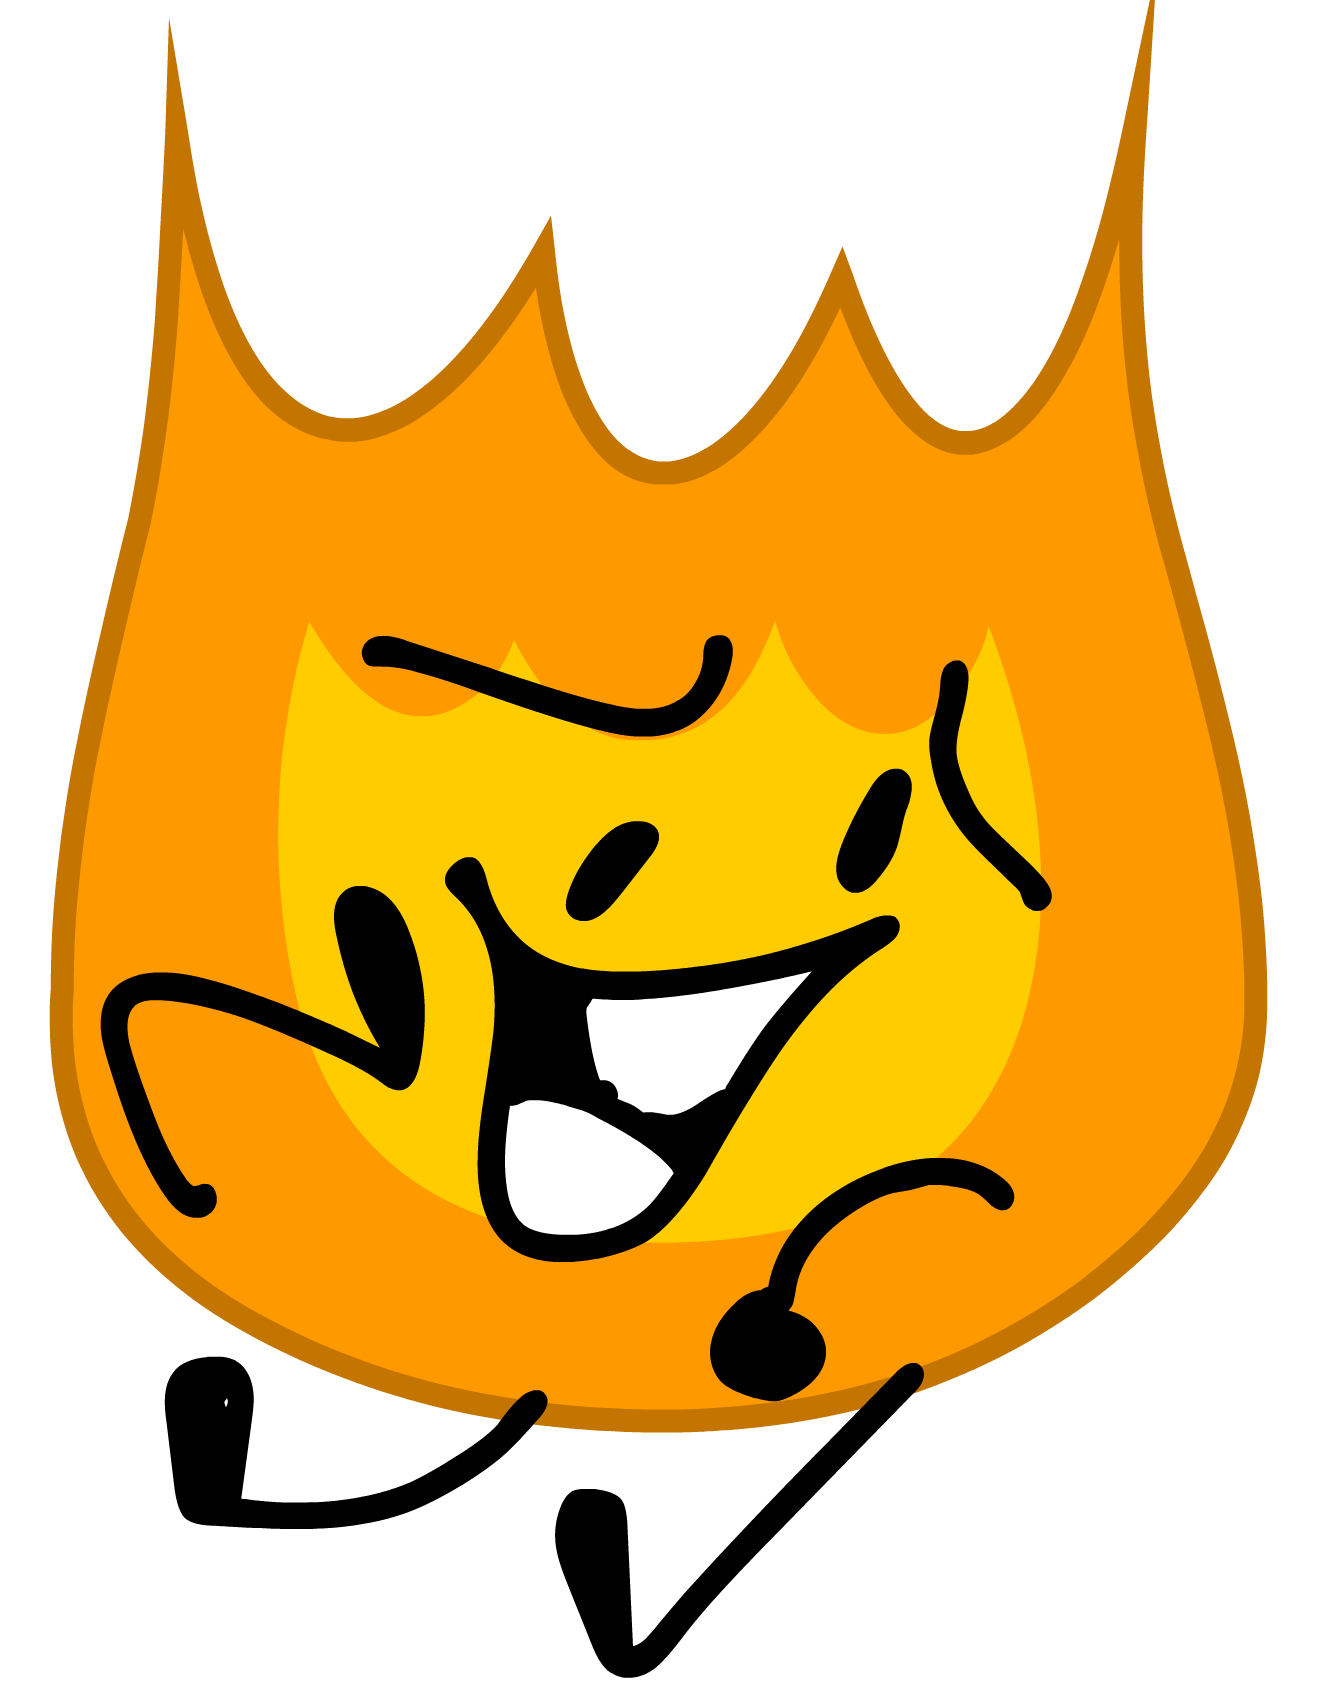 This visual is about firey bfb freetoedit #firey #bfb.